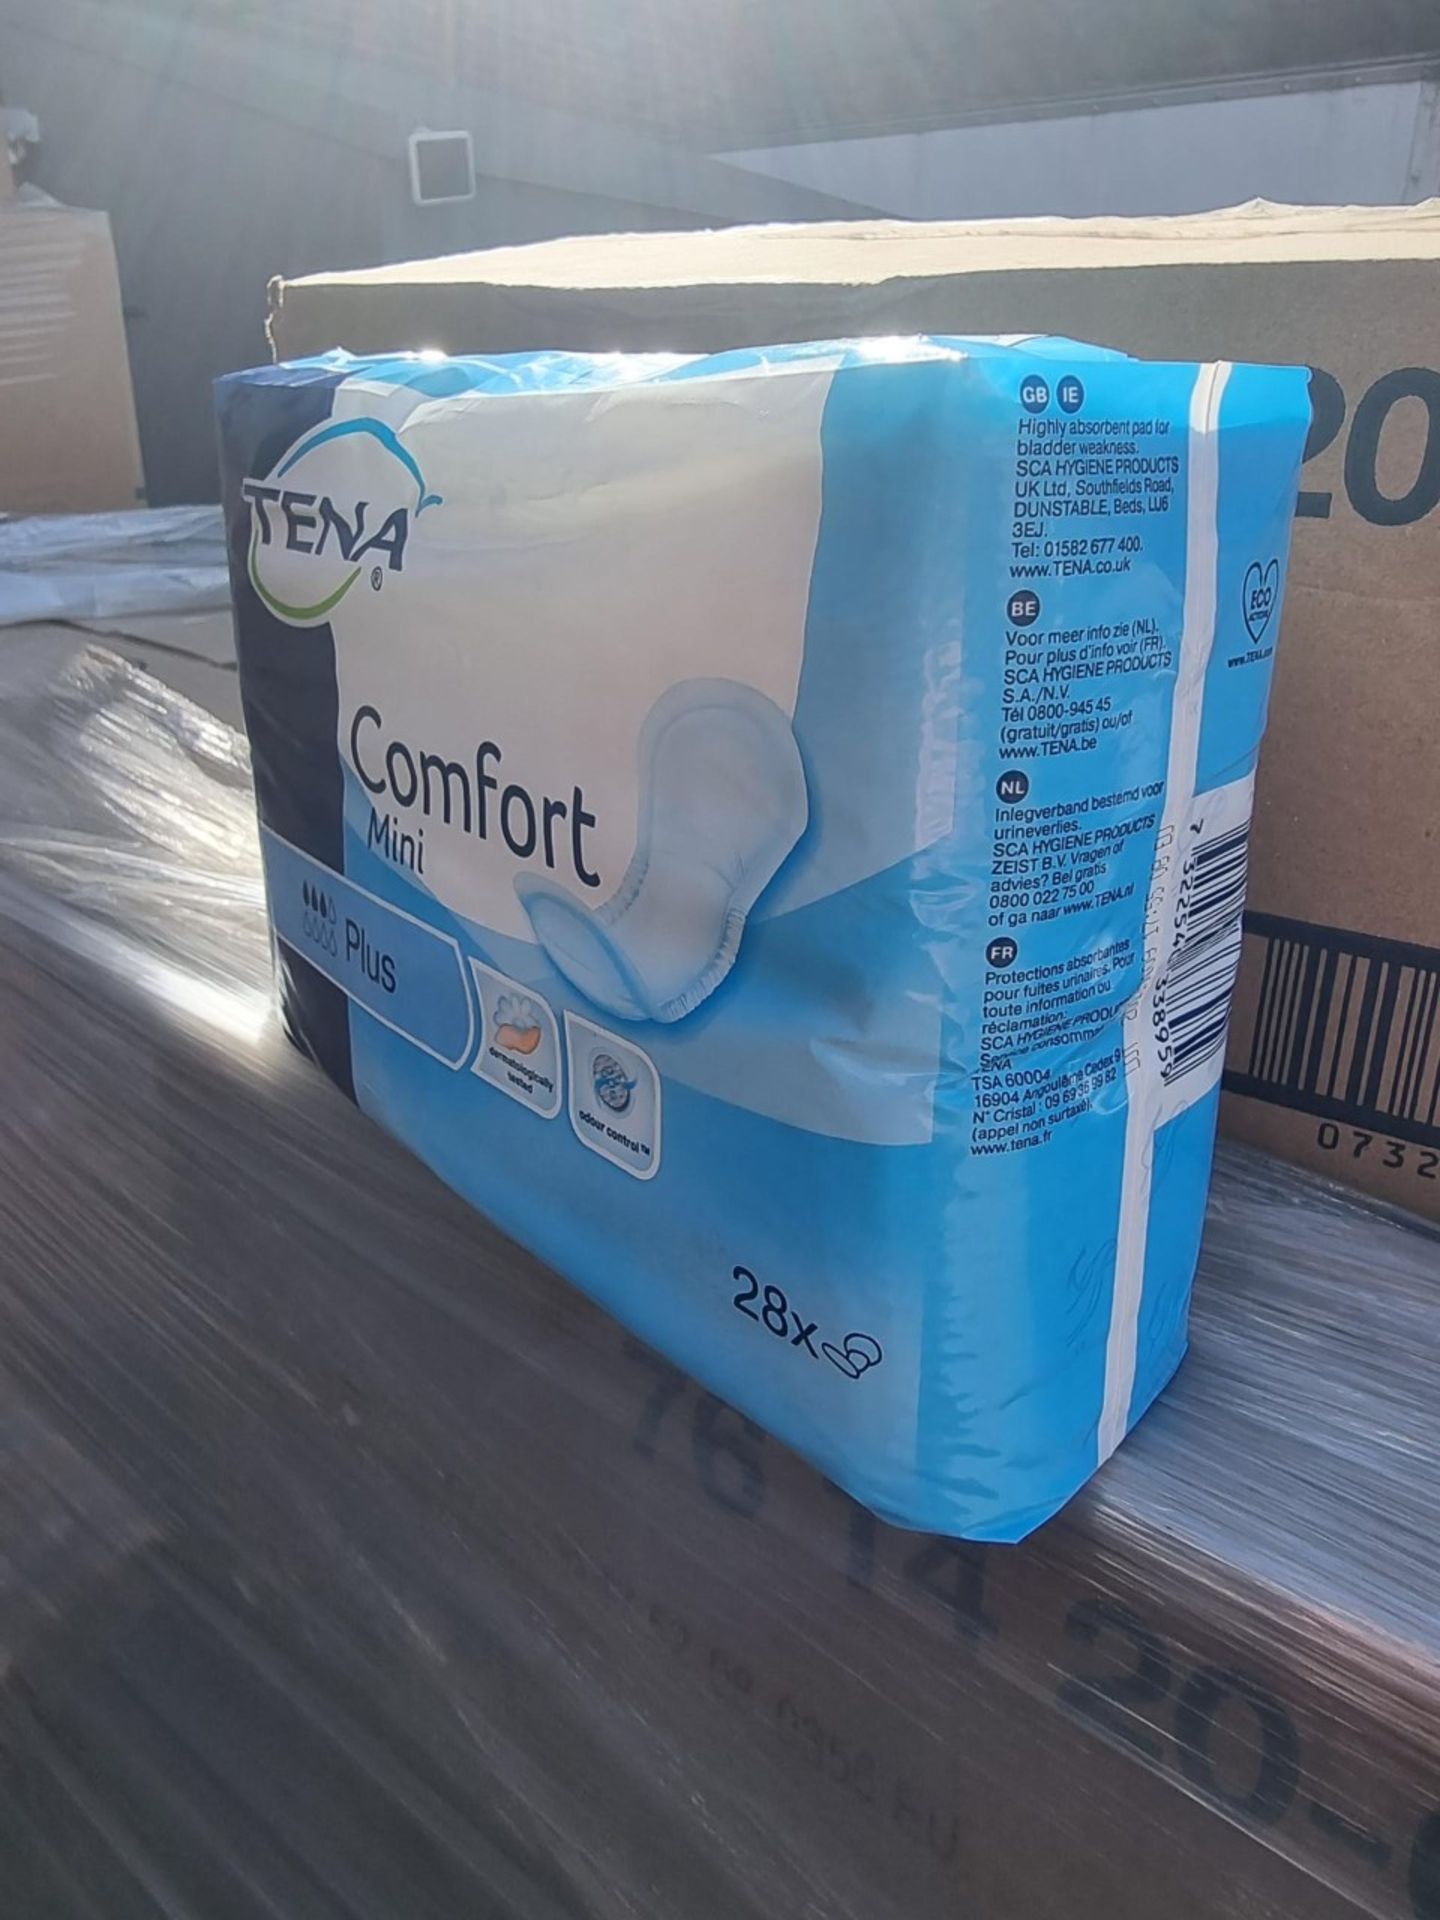 NO VAT(E48) PALLET TO CONTAIN 129 x NEW PACKS OF 28 TENA COMFORT MINI PLUS HIGHLY ABSORBANT PADS. - Image 2 of 2